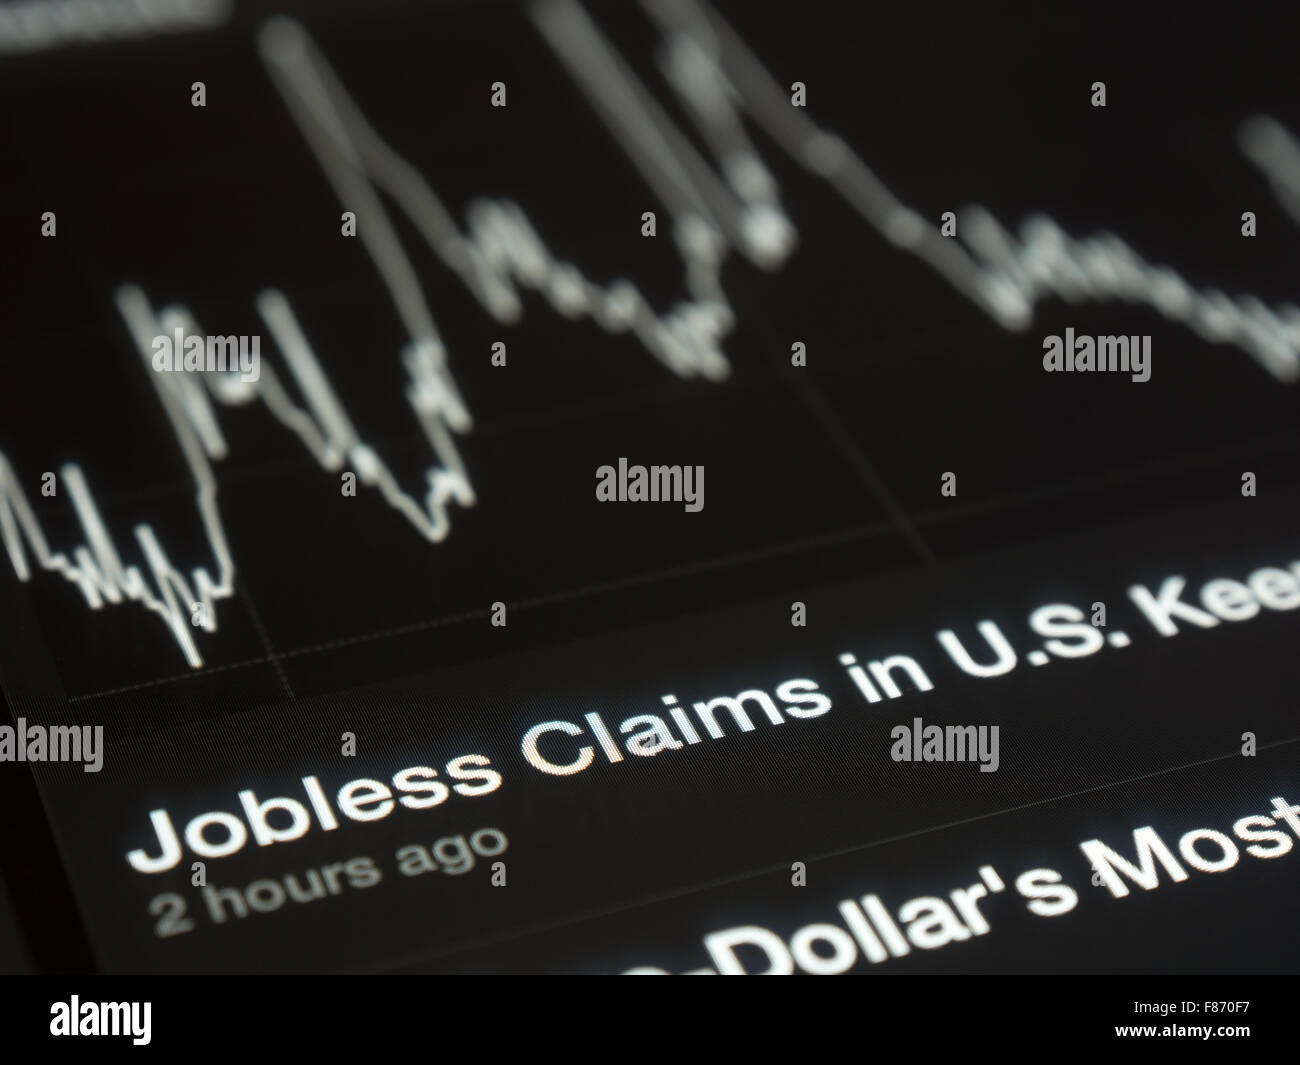 USA jobless graph on a tablet screen Stock Photo